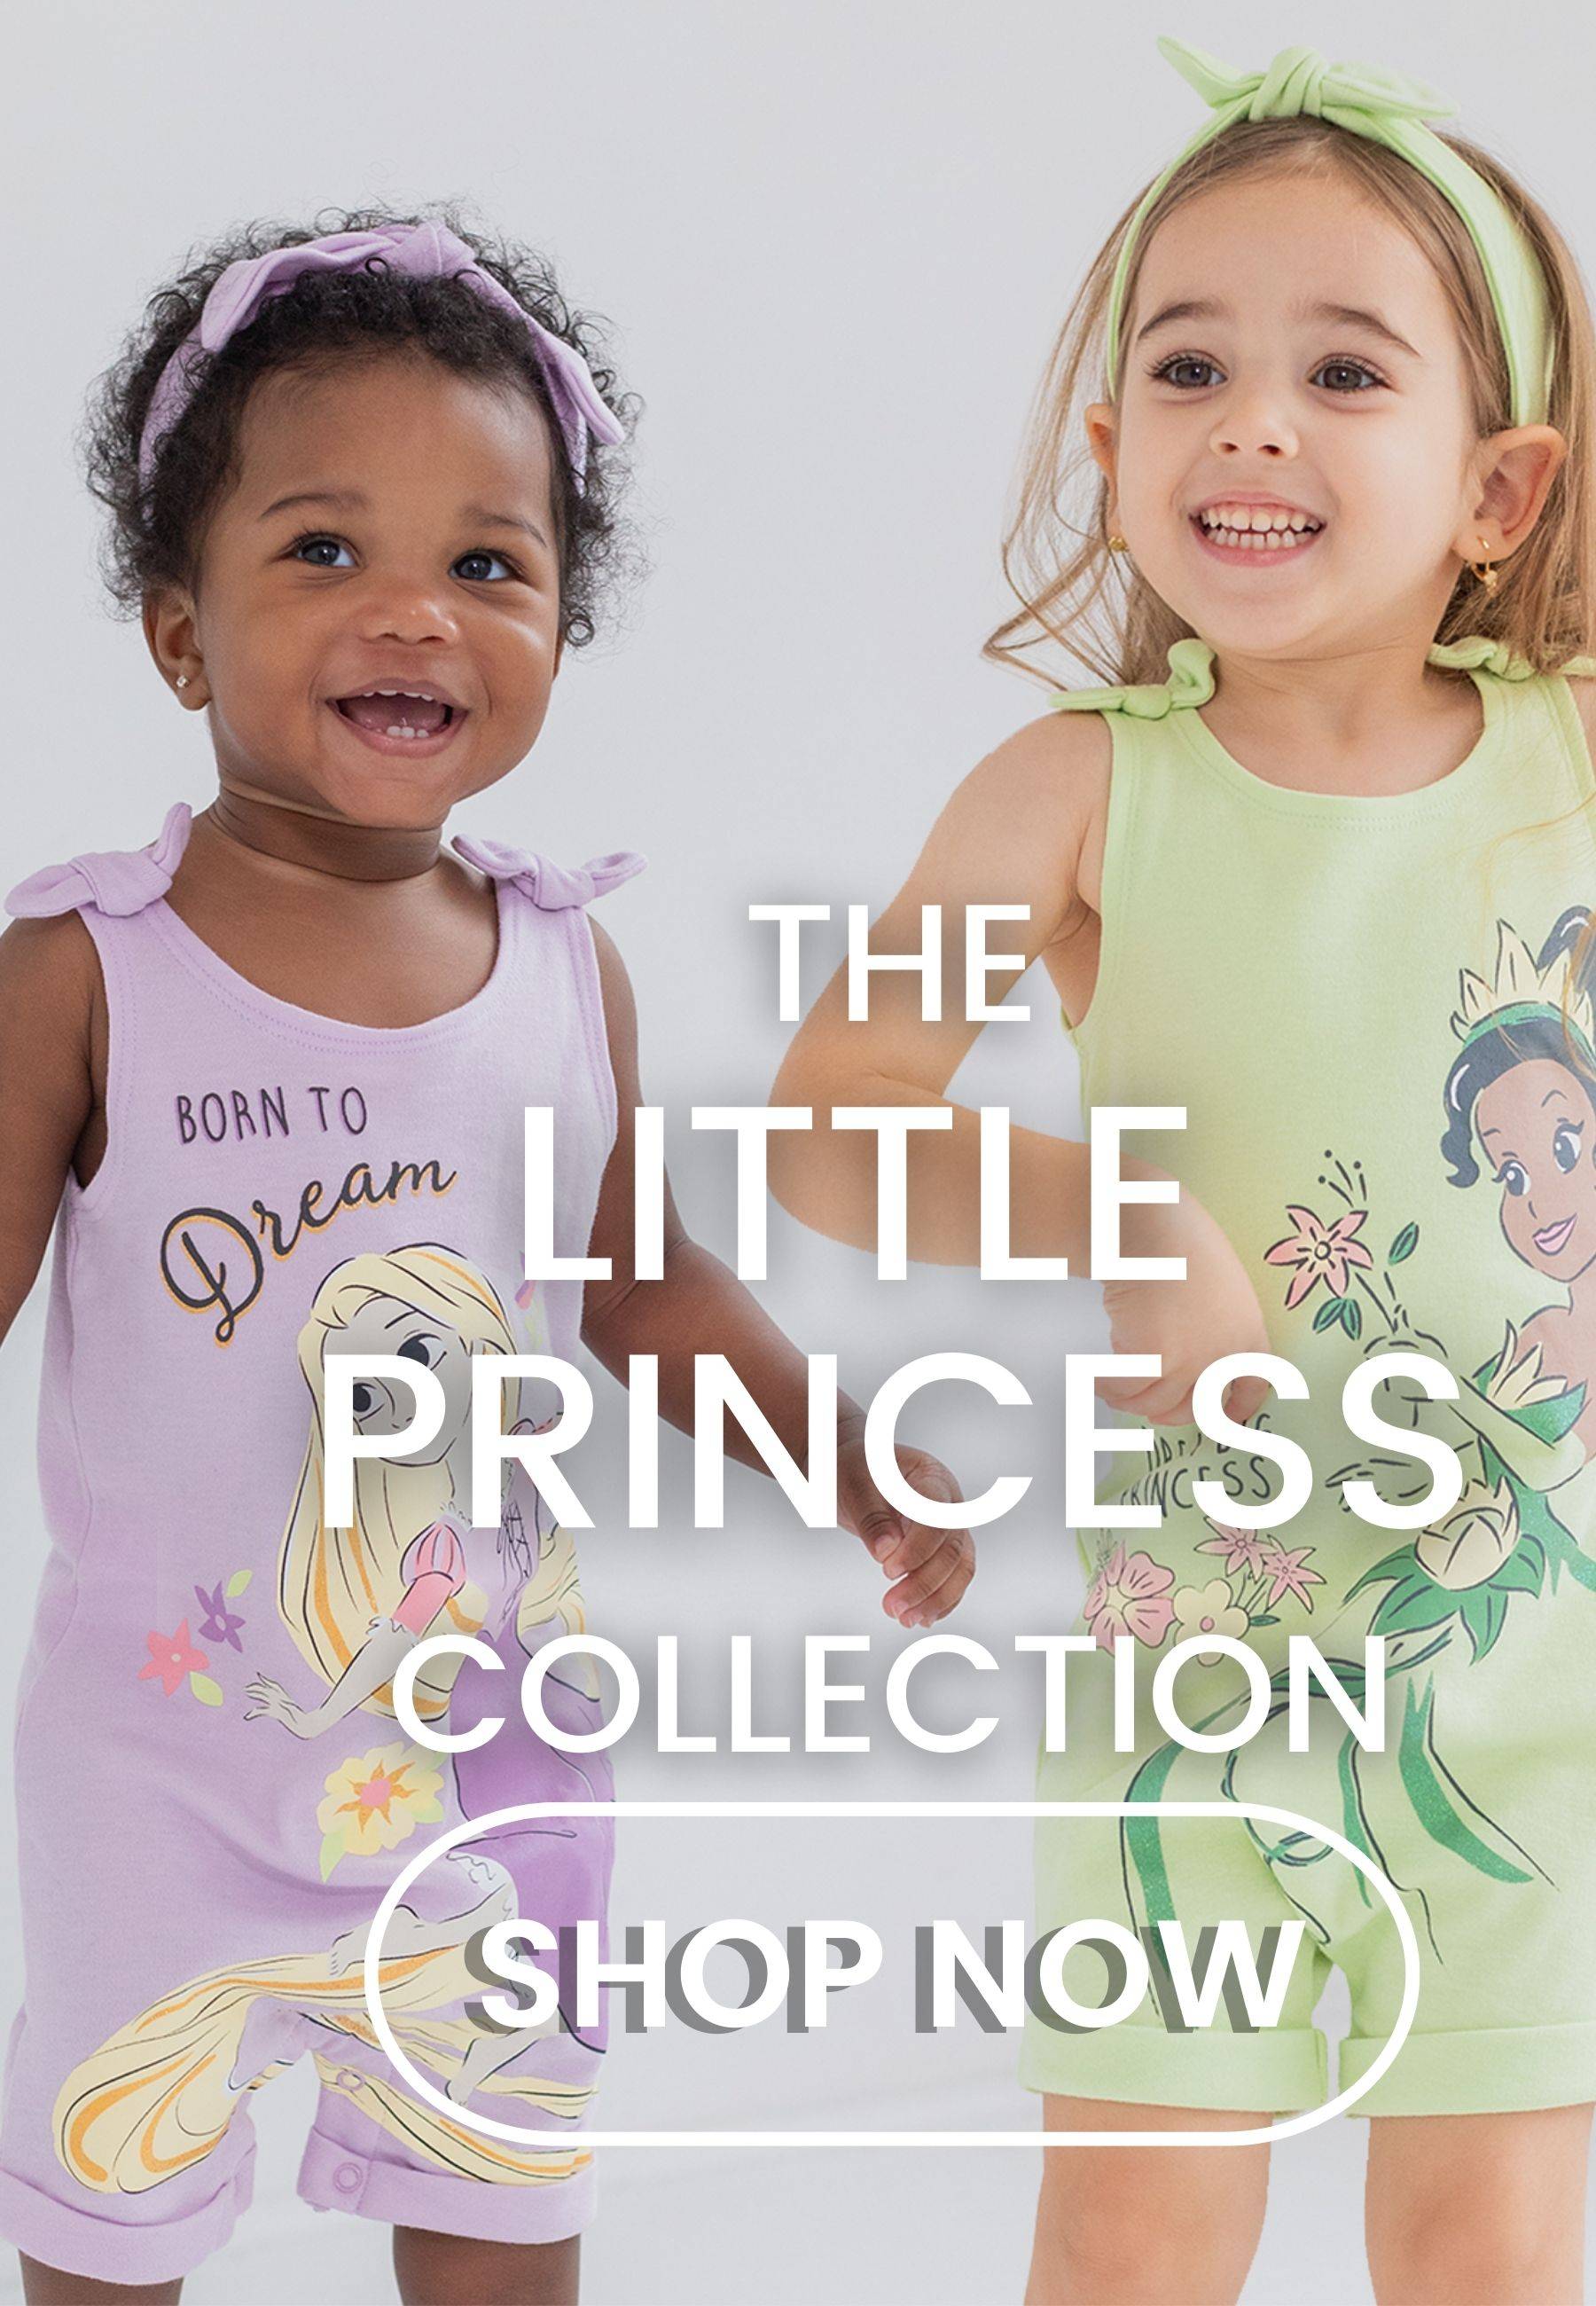 The Little Princess Collection